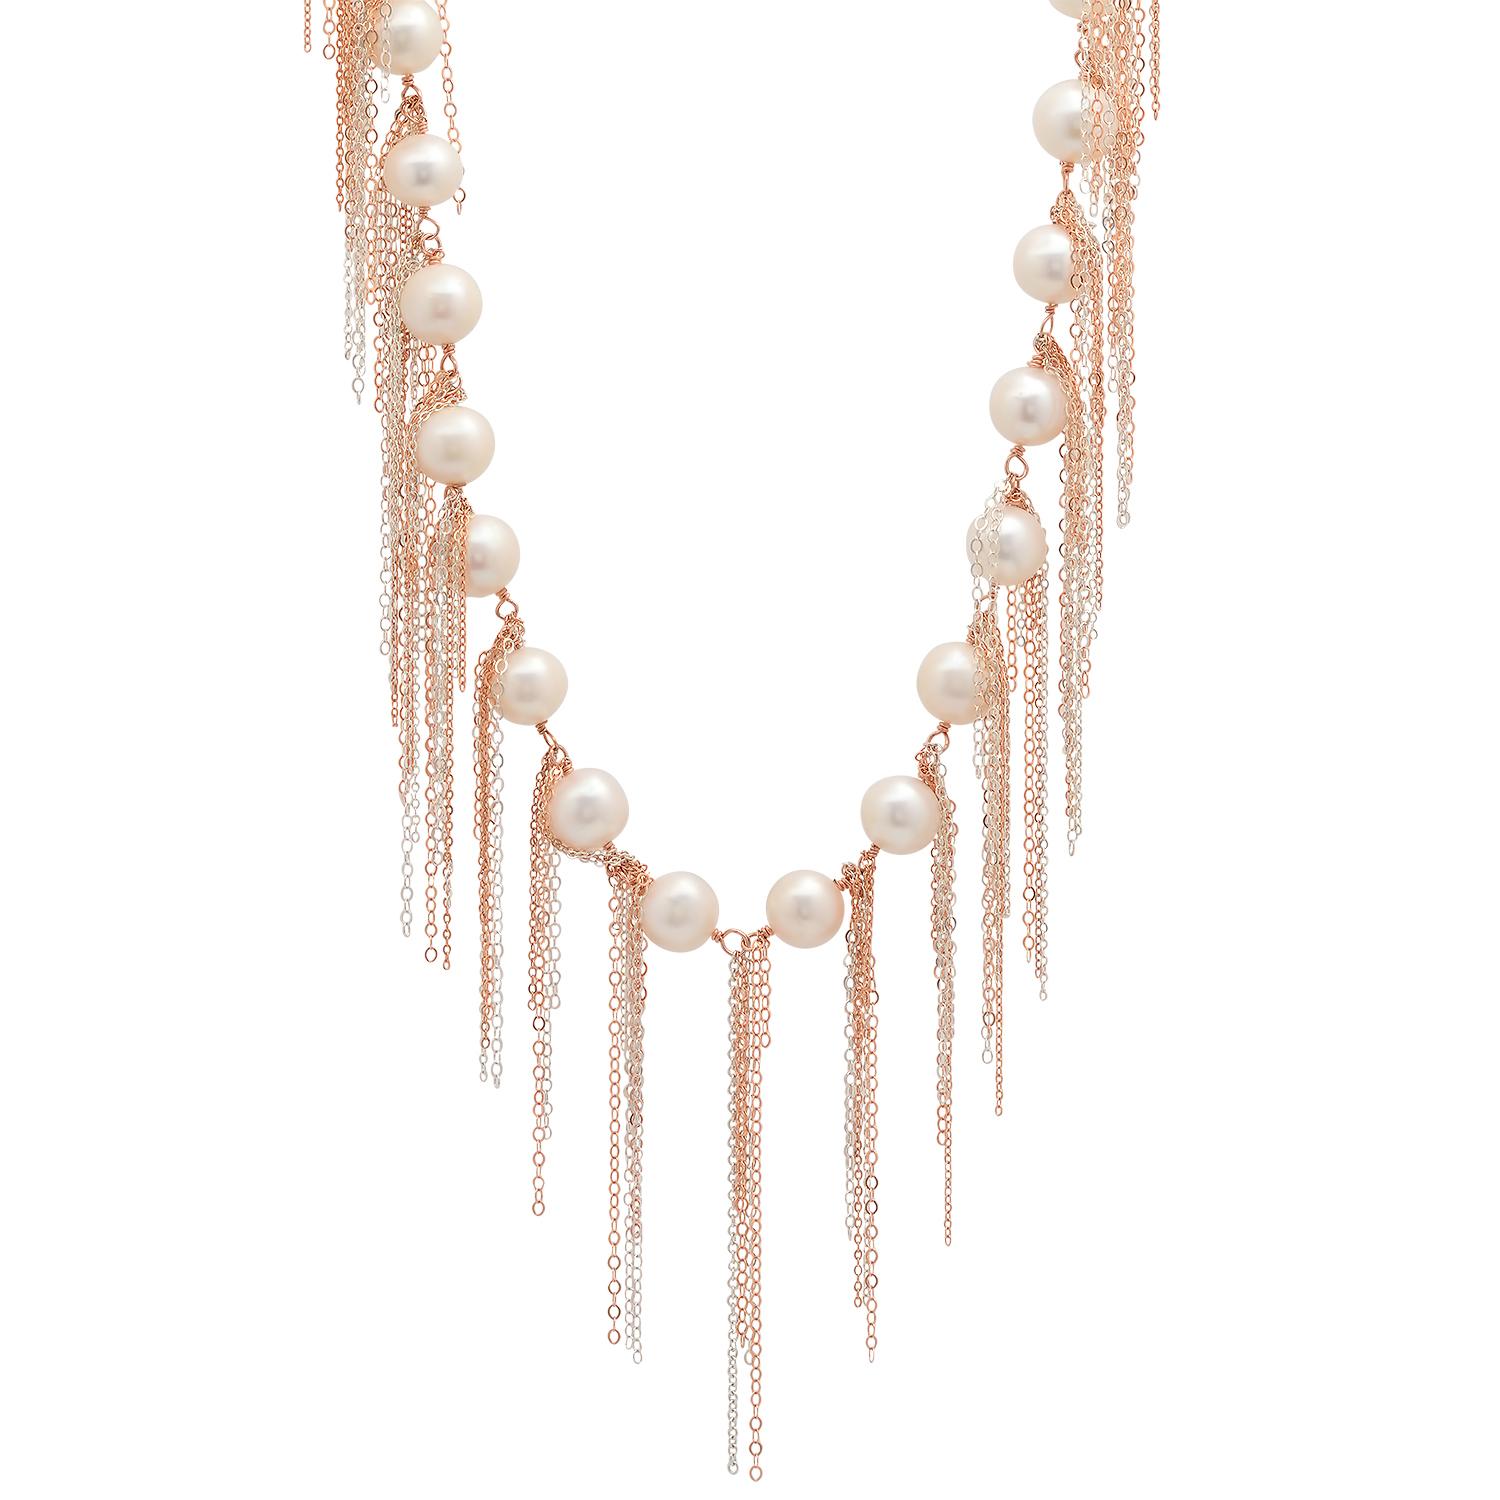 Signature White freshwater pearl fringe necklace by Los Angeles based fine jewelry designer, Samira 13. Sterling sliver and Rose Gold filled chain. Can be worn many ways. 62